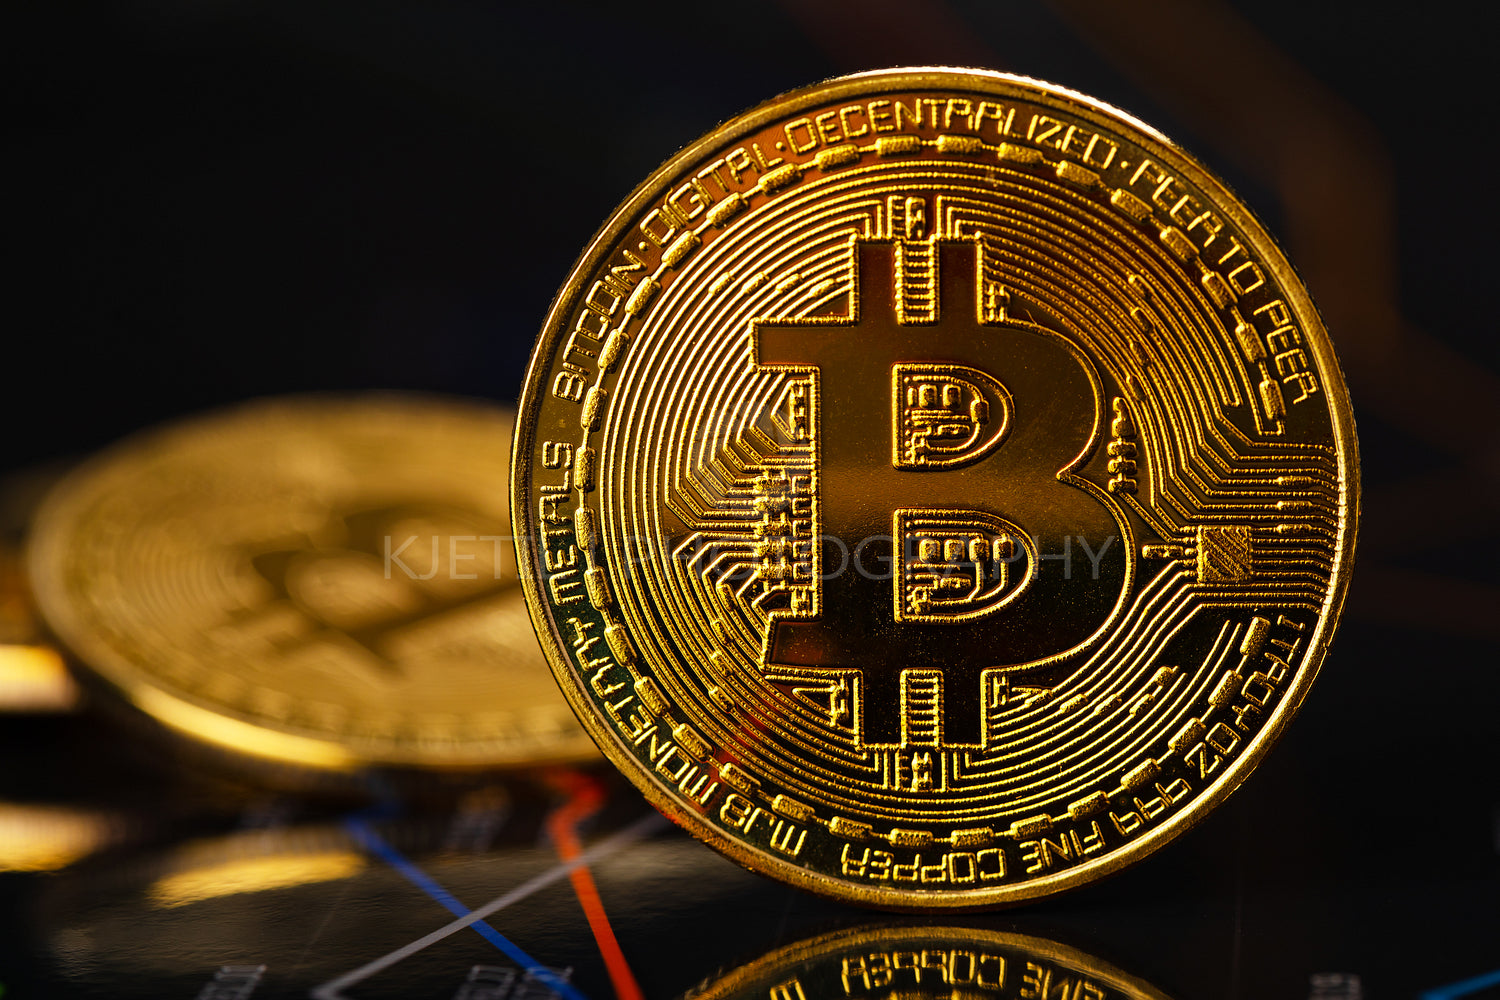 Gold bitcoin standing on financial charts for cryptocurrency prices